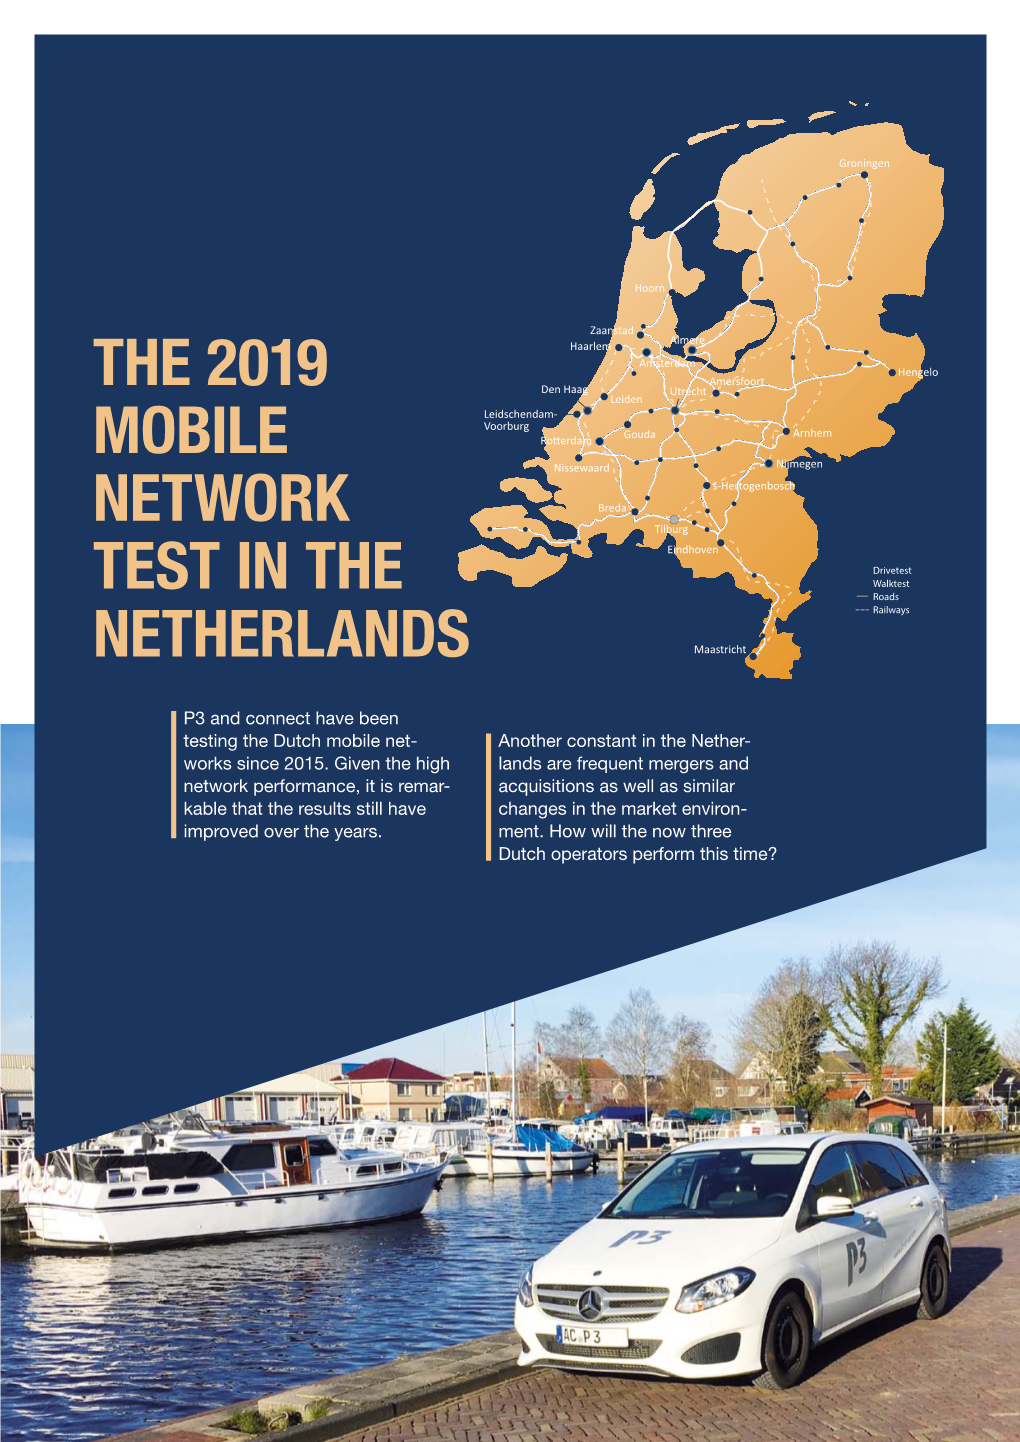 The 2019 Mobile Network Test in the Netherlands